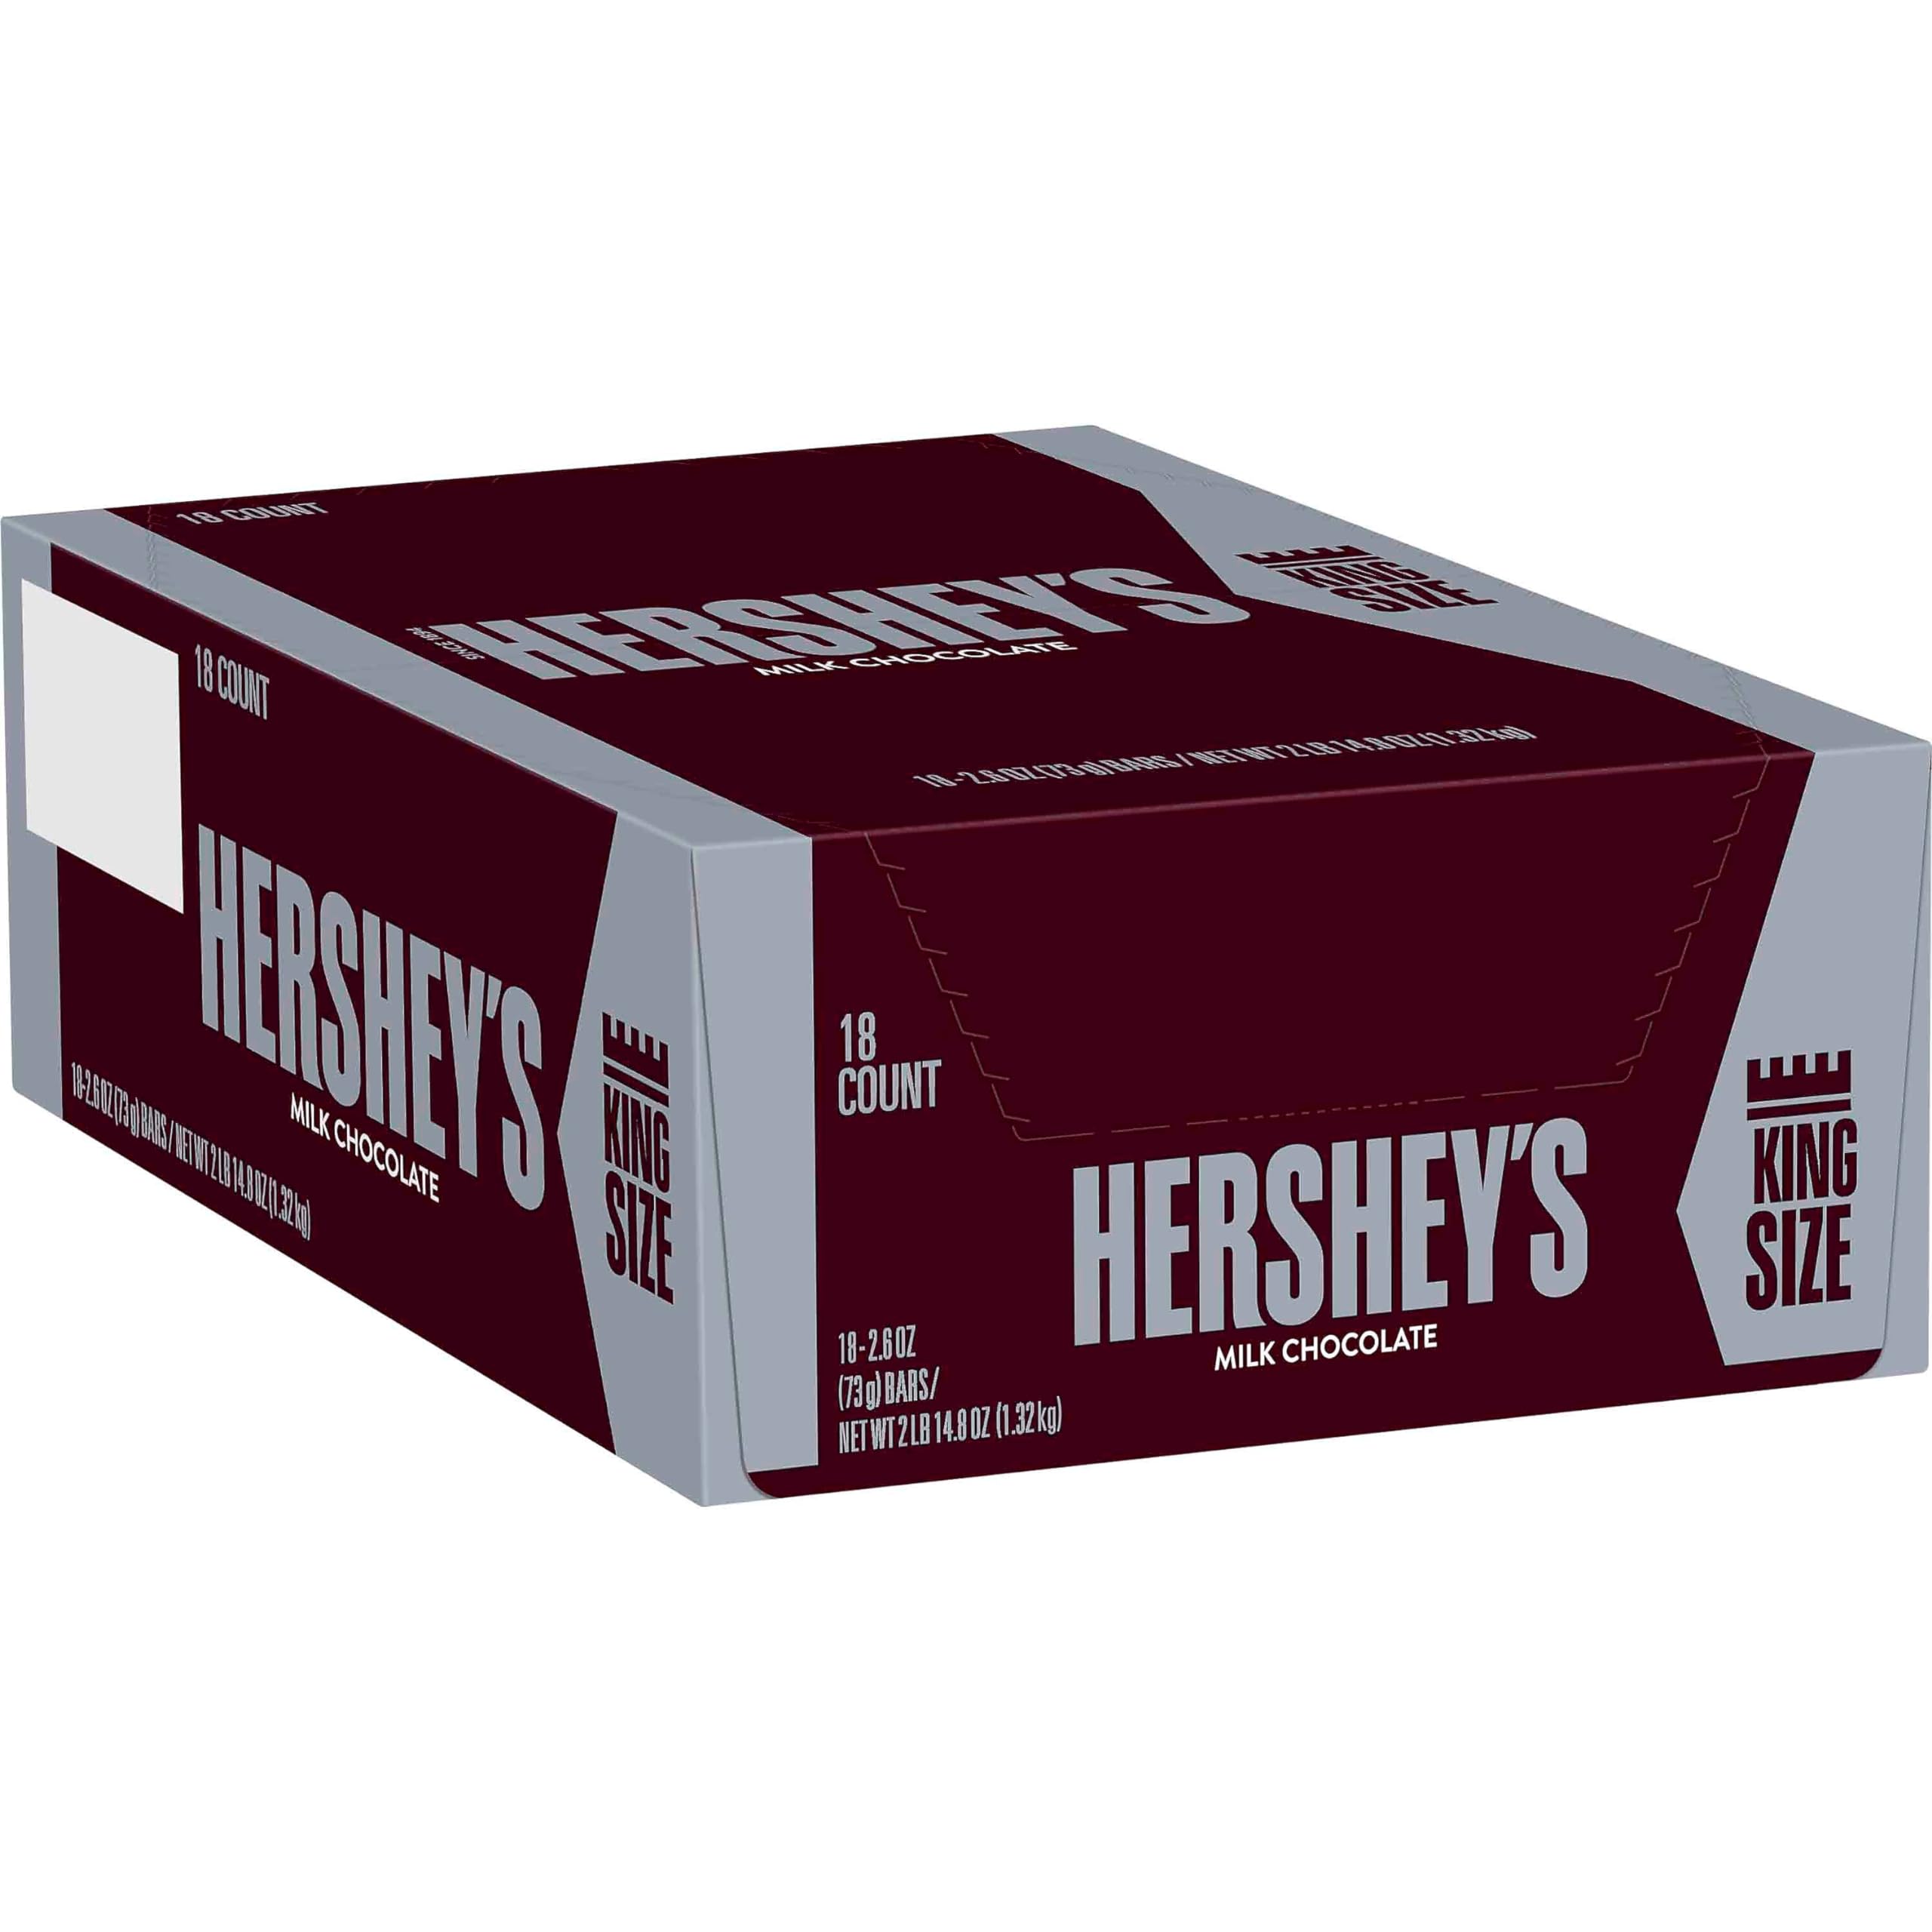 HERSHEY'S Milk Chocolate King Size, Candy Bars, 2.6 oz (18 Count) [Subscribe & Save] $18.23